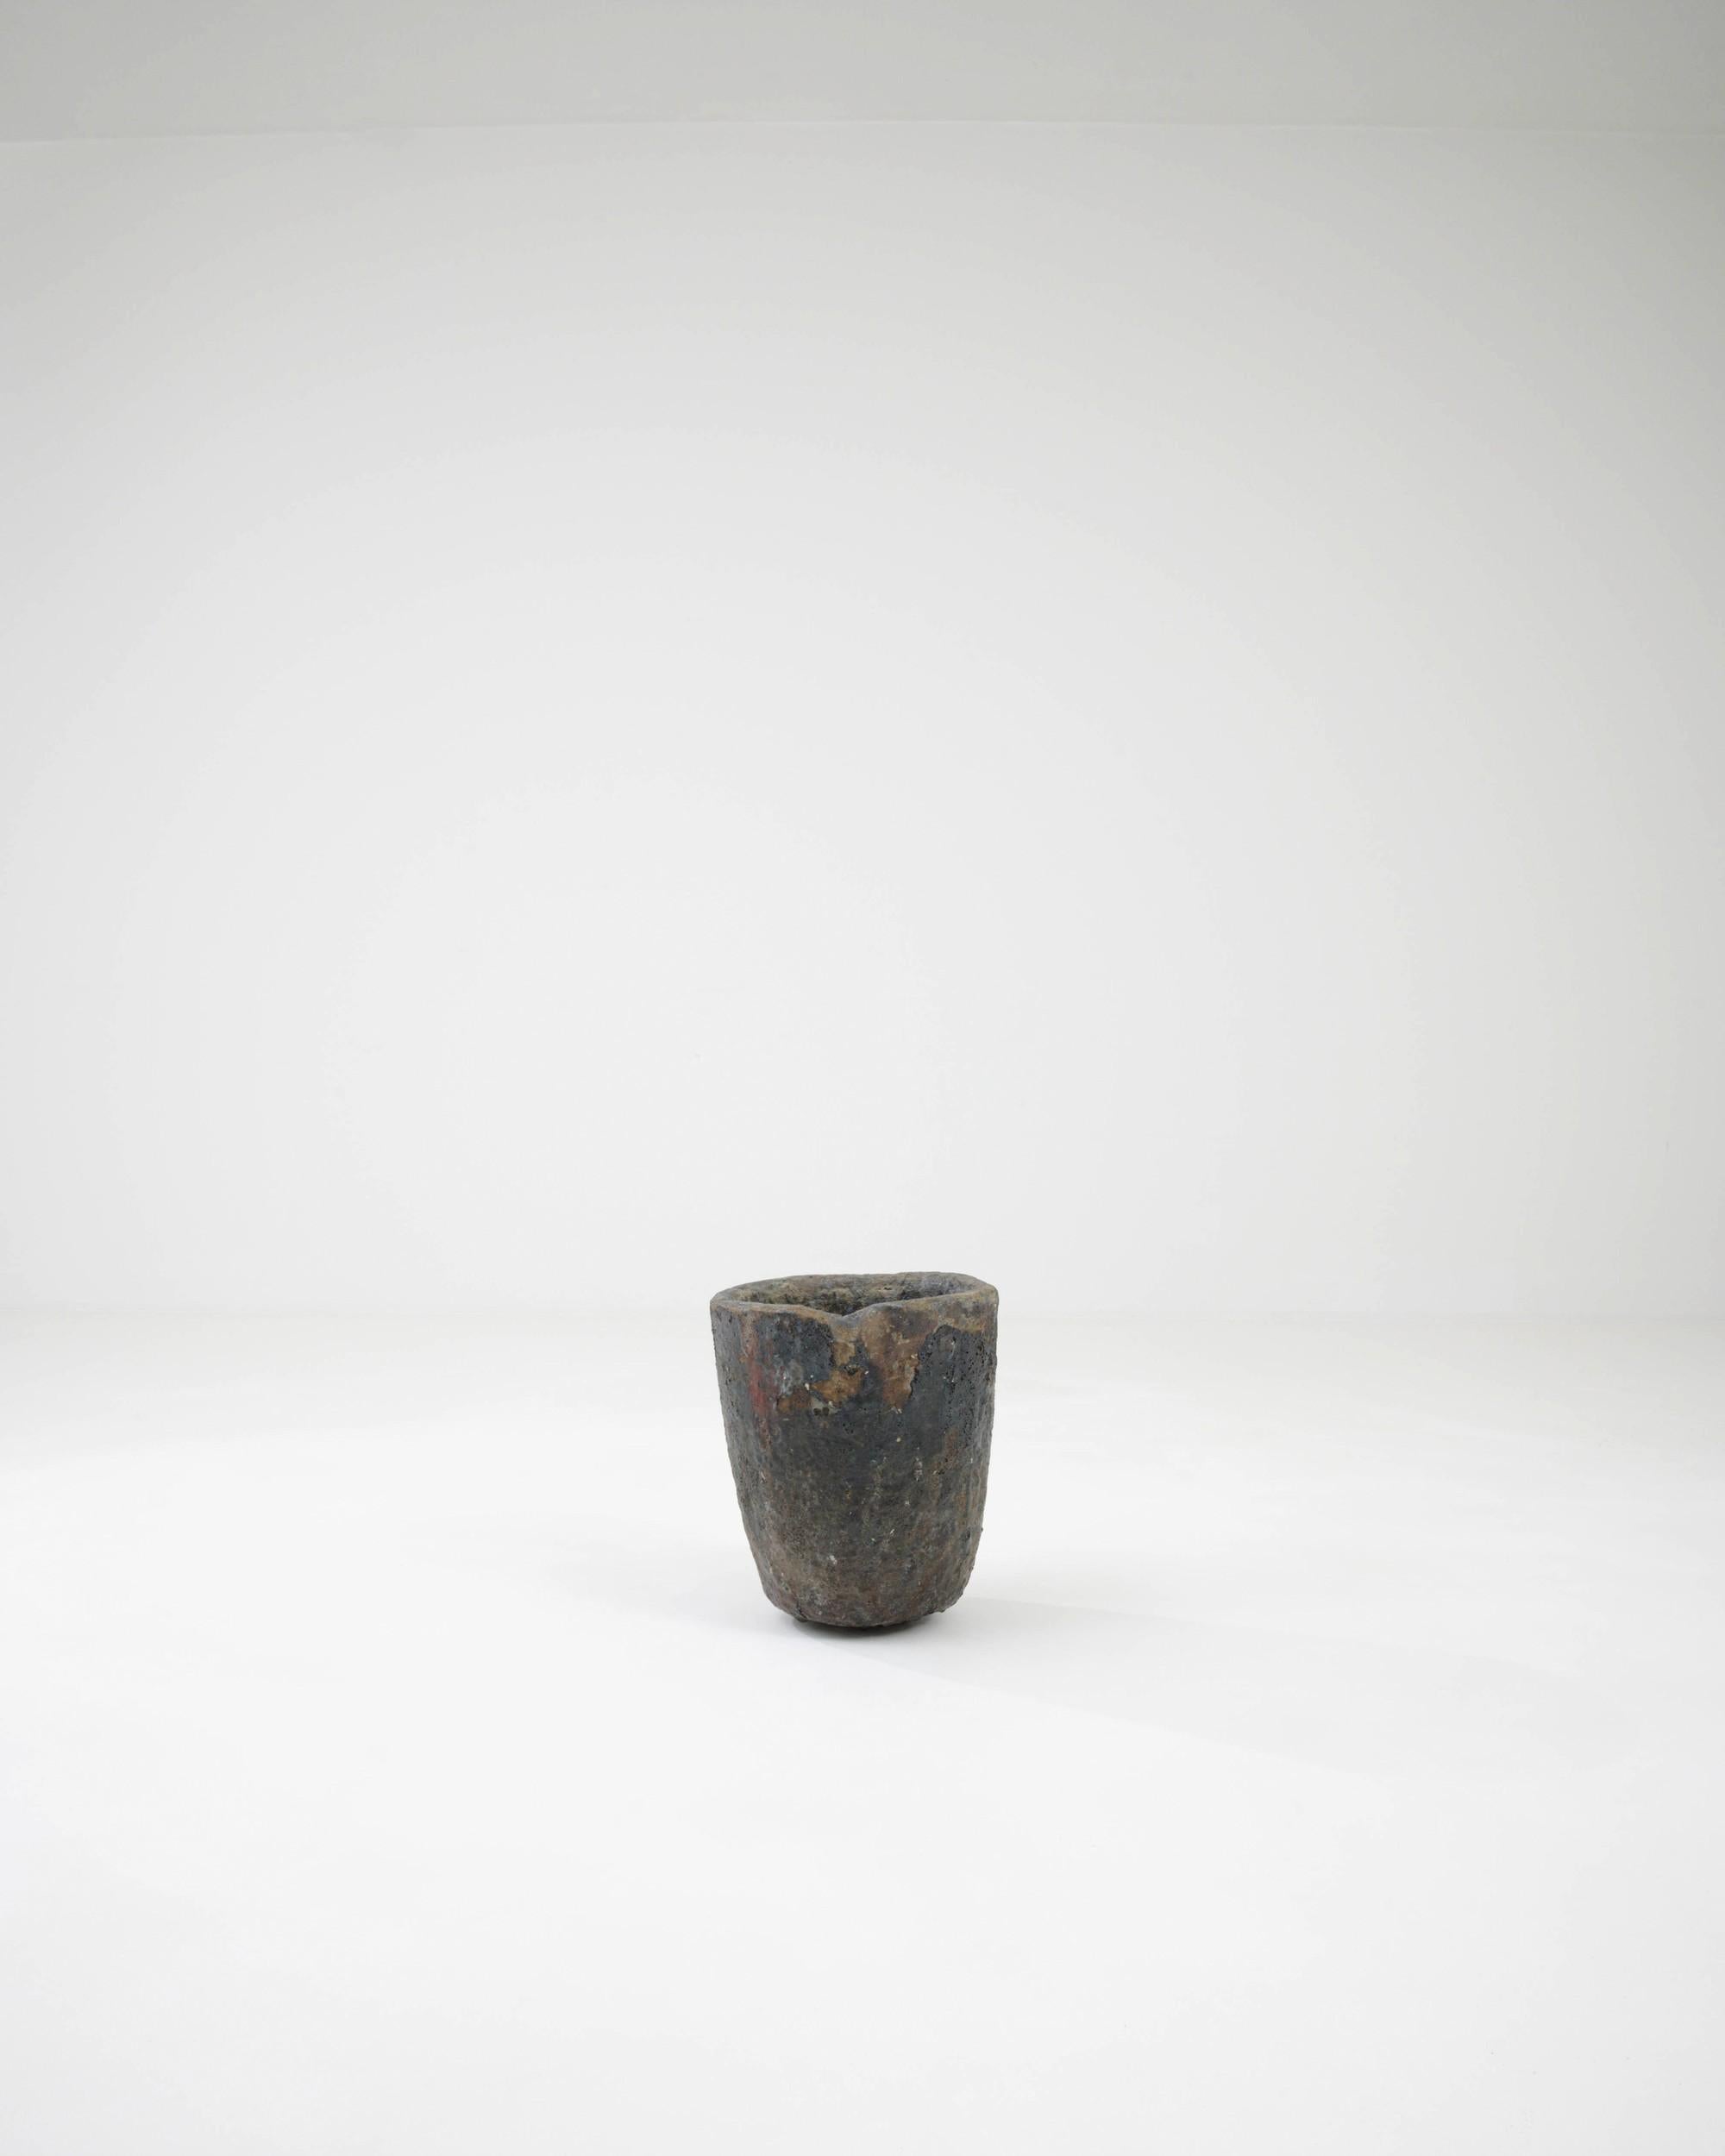 Simple, sculptural and supremely tactile, this vintage foundry crucible has an ardent Industrial past. Made in 20th century Czechia, this piece would have originally been used for melting metals in a furnace. Pits and craters mark the surface of the